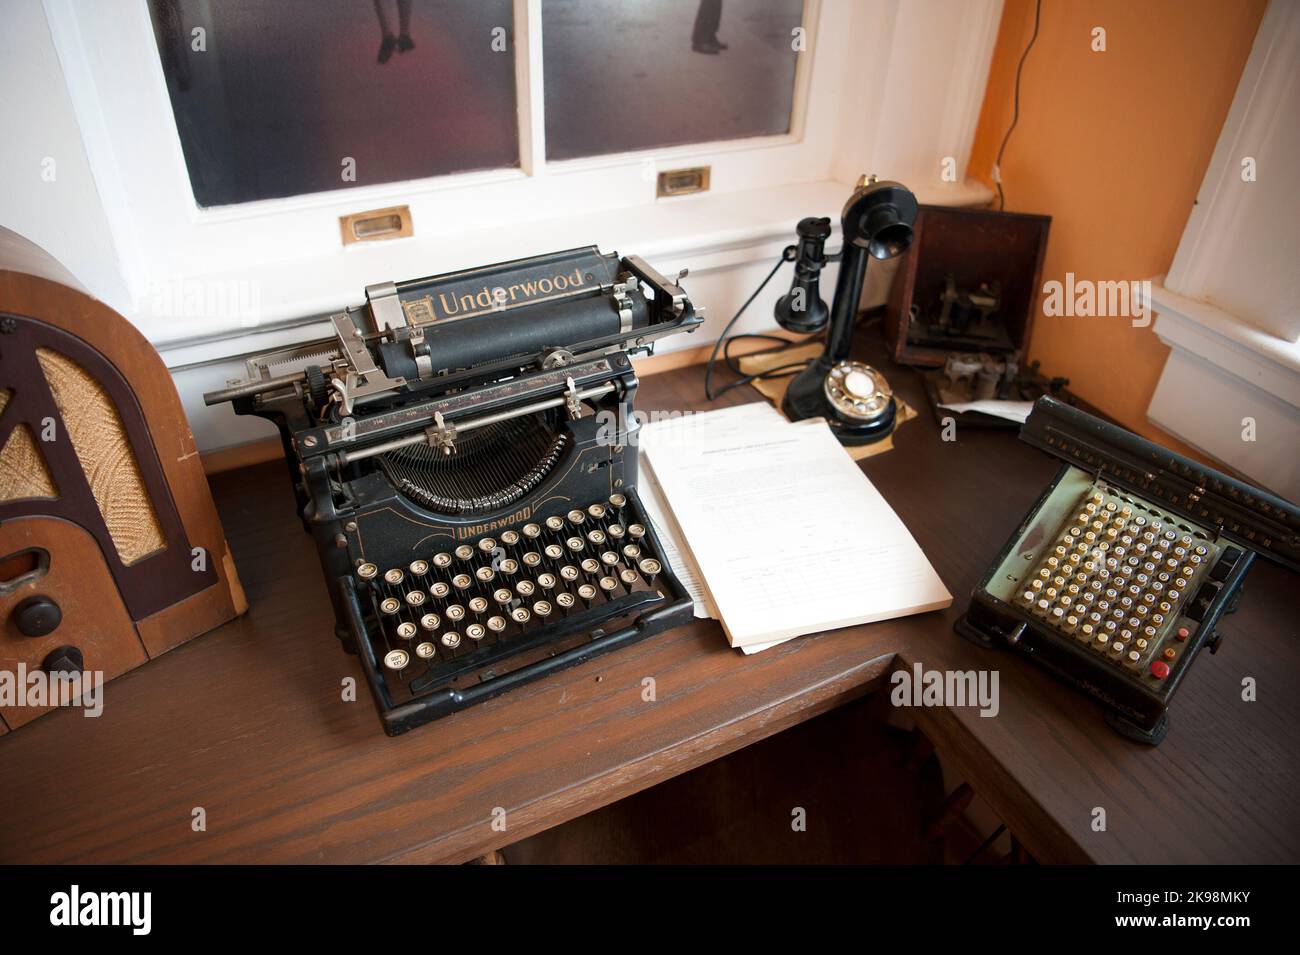 Antique desk with Underwood typewriter, telephone, radio and adding machine in a display at the Dunedin Historic Museum in Dunedin, Florida, USA Stock Photo